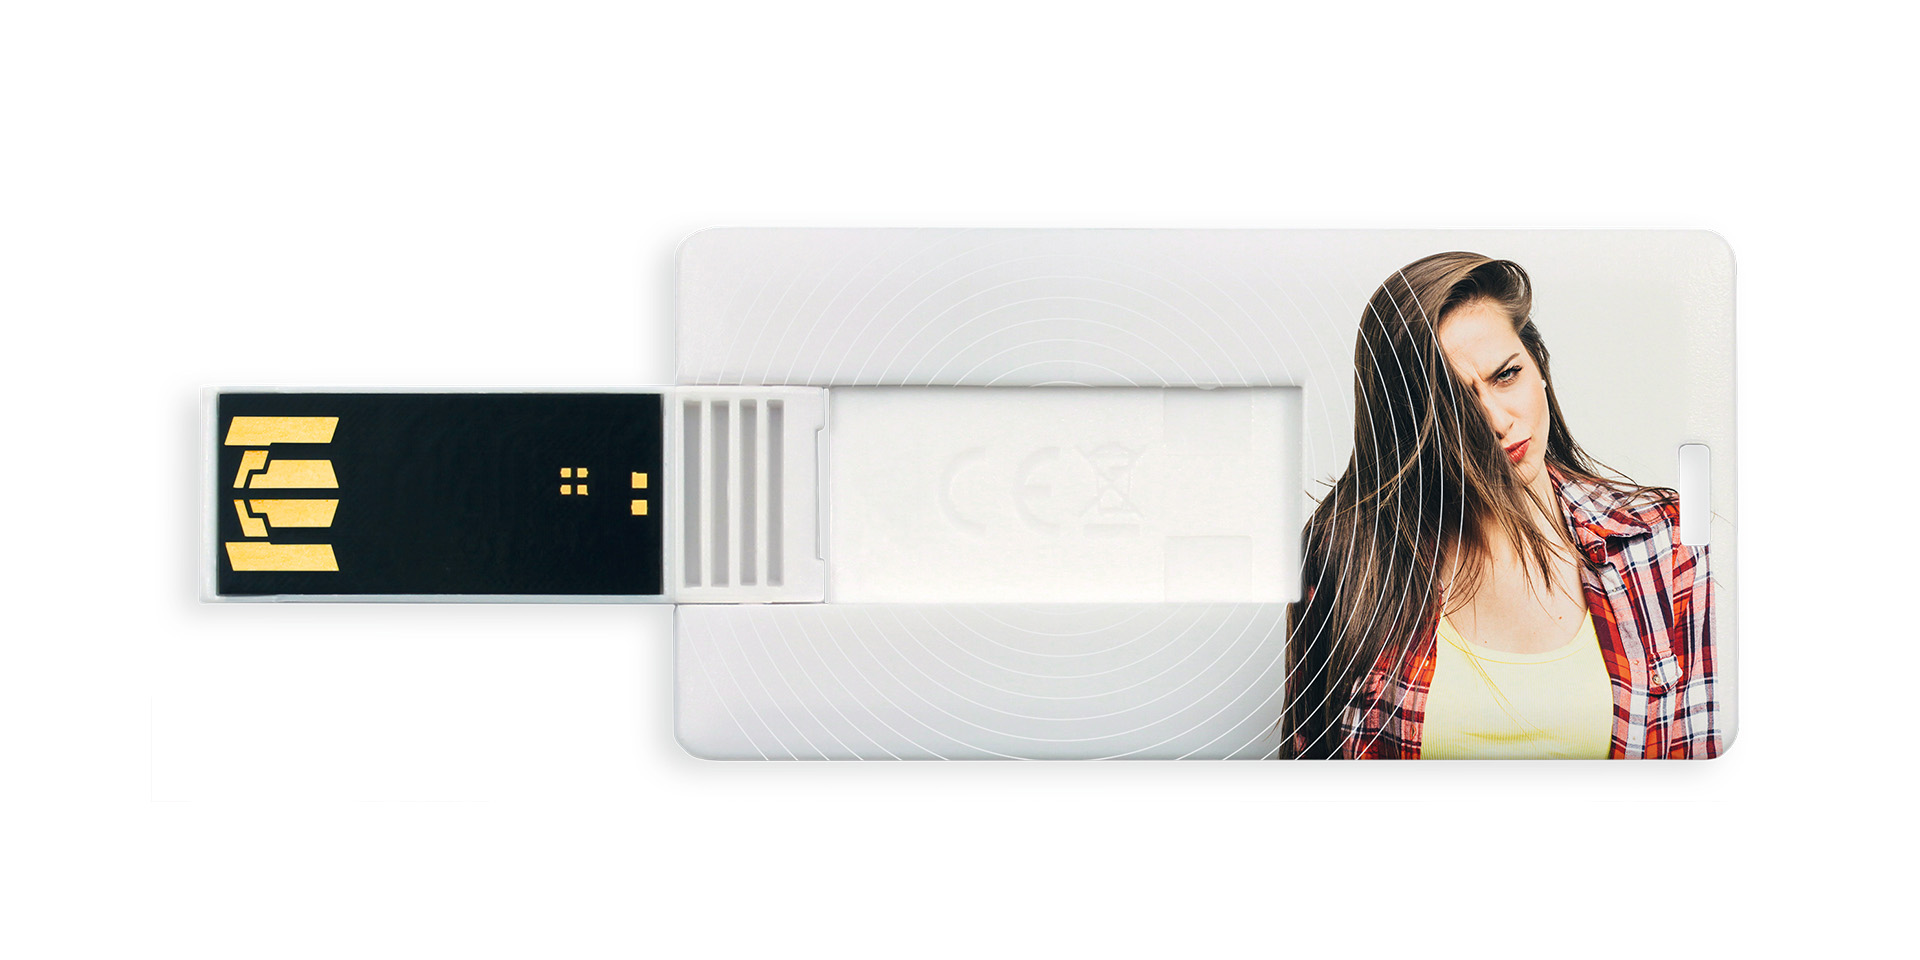 Credit card USb for color printing